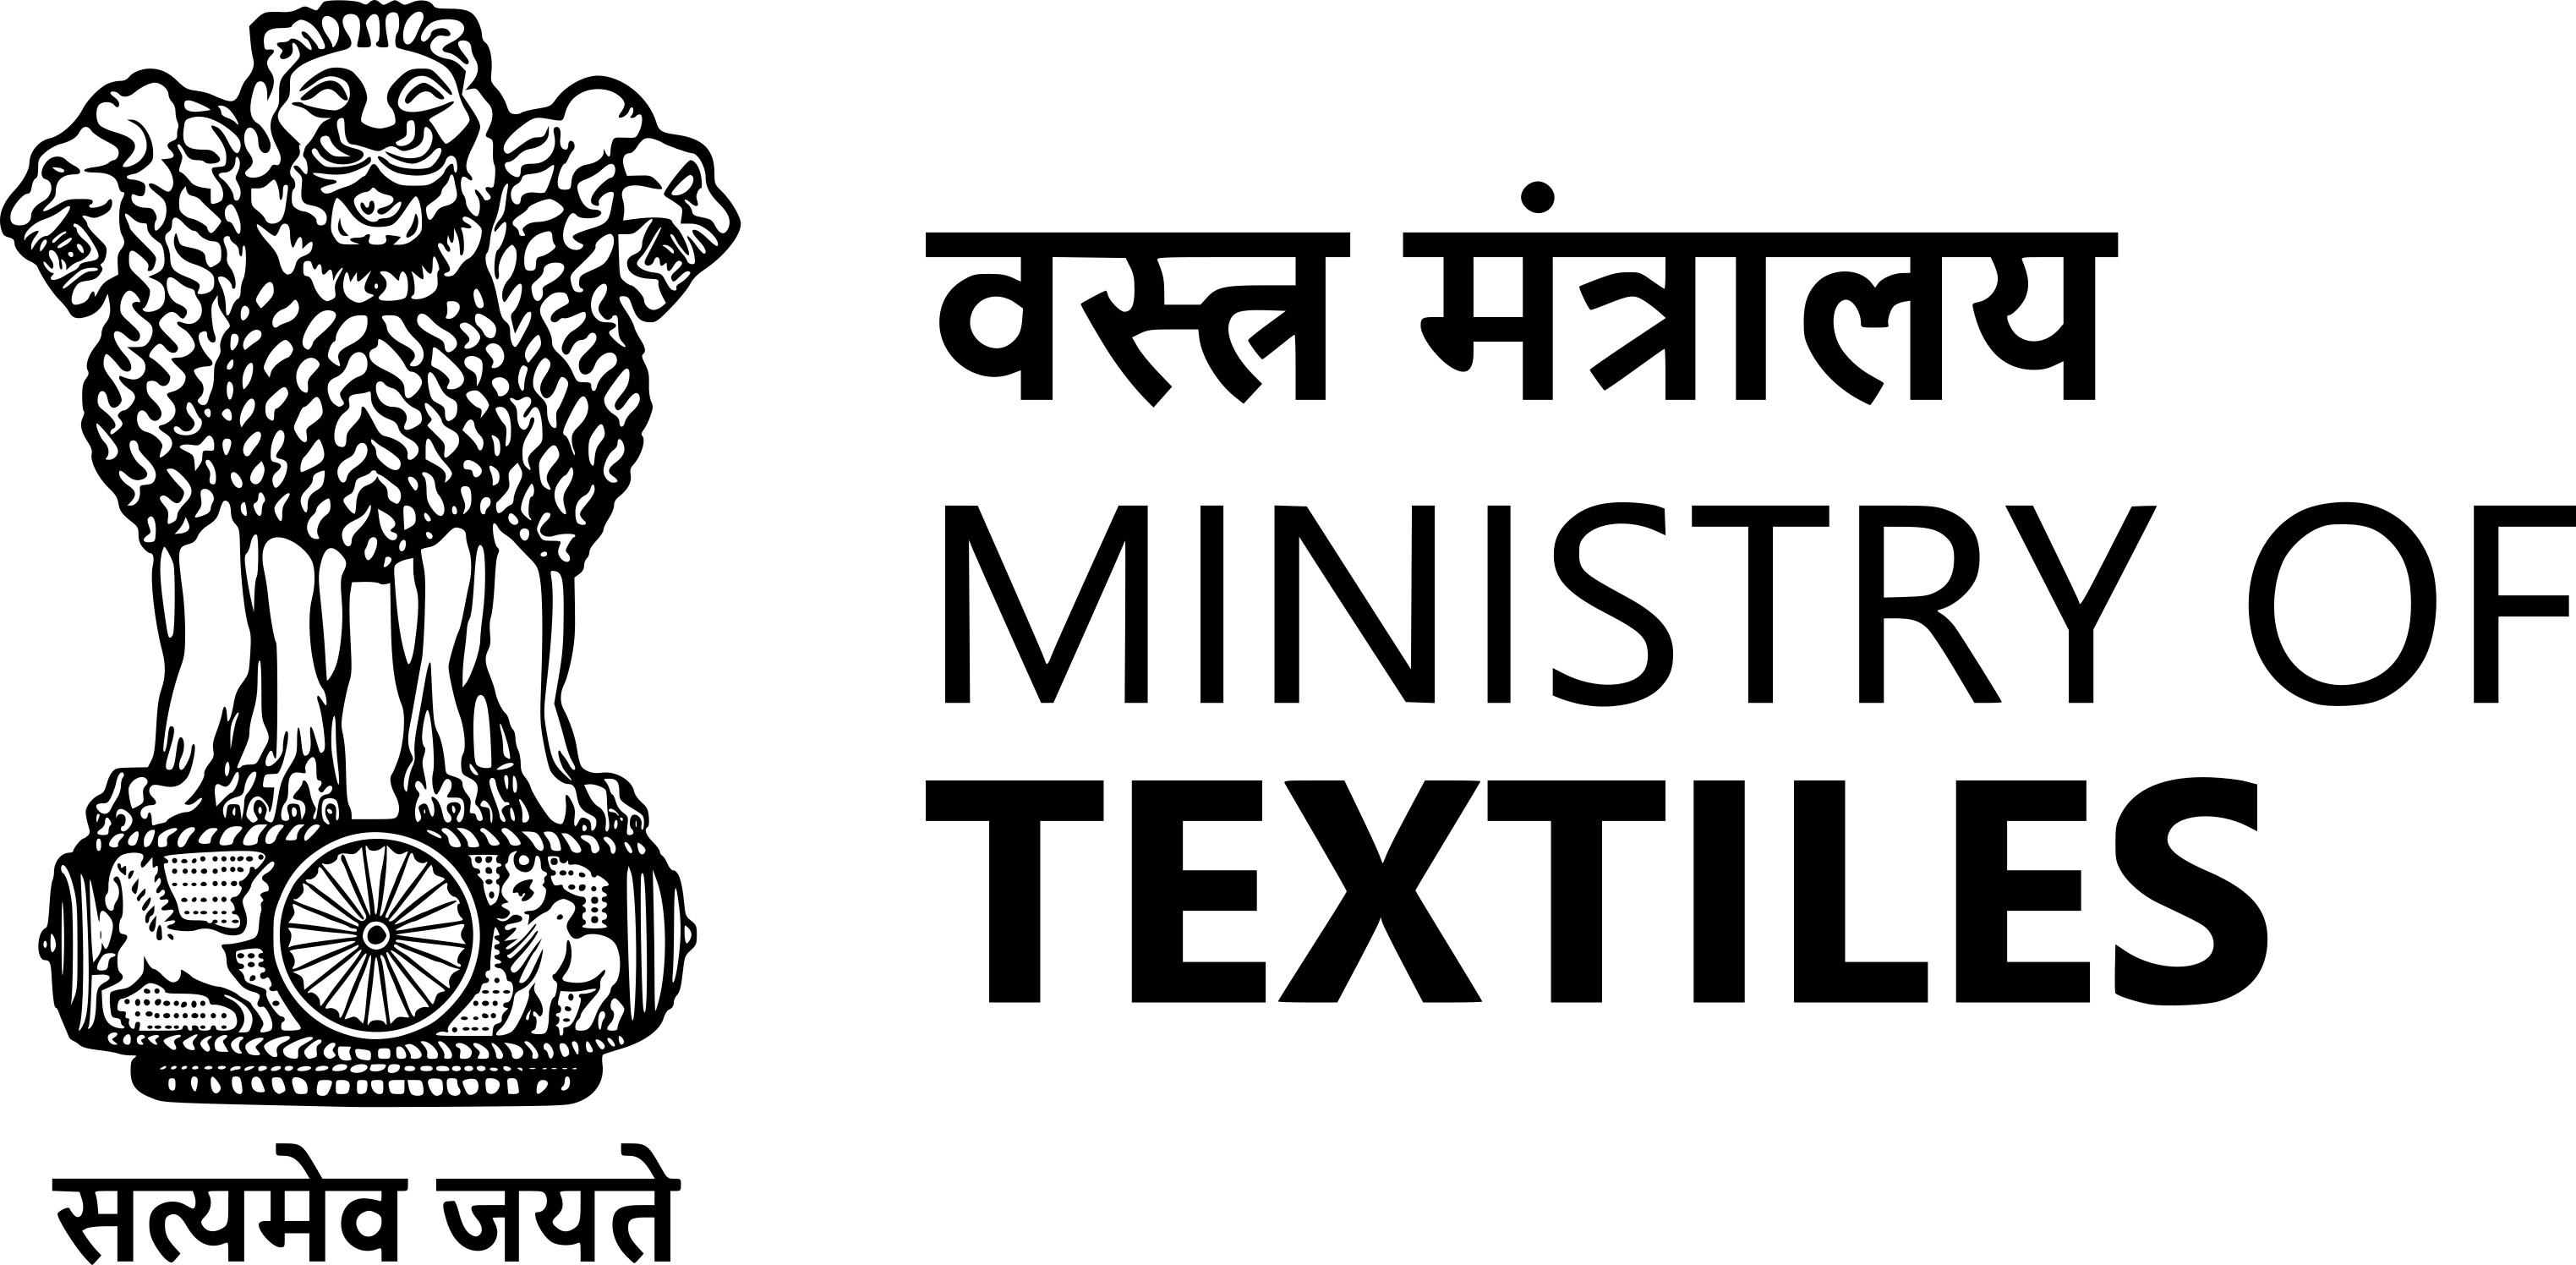 Textile Ministry probably get a marginal rise of 2.5% in the